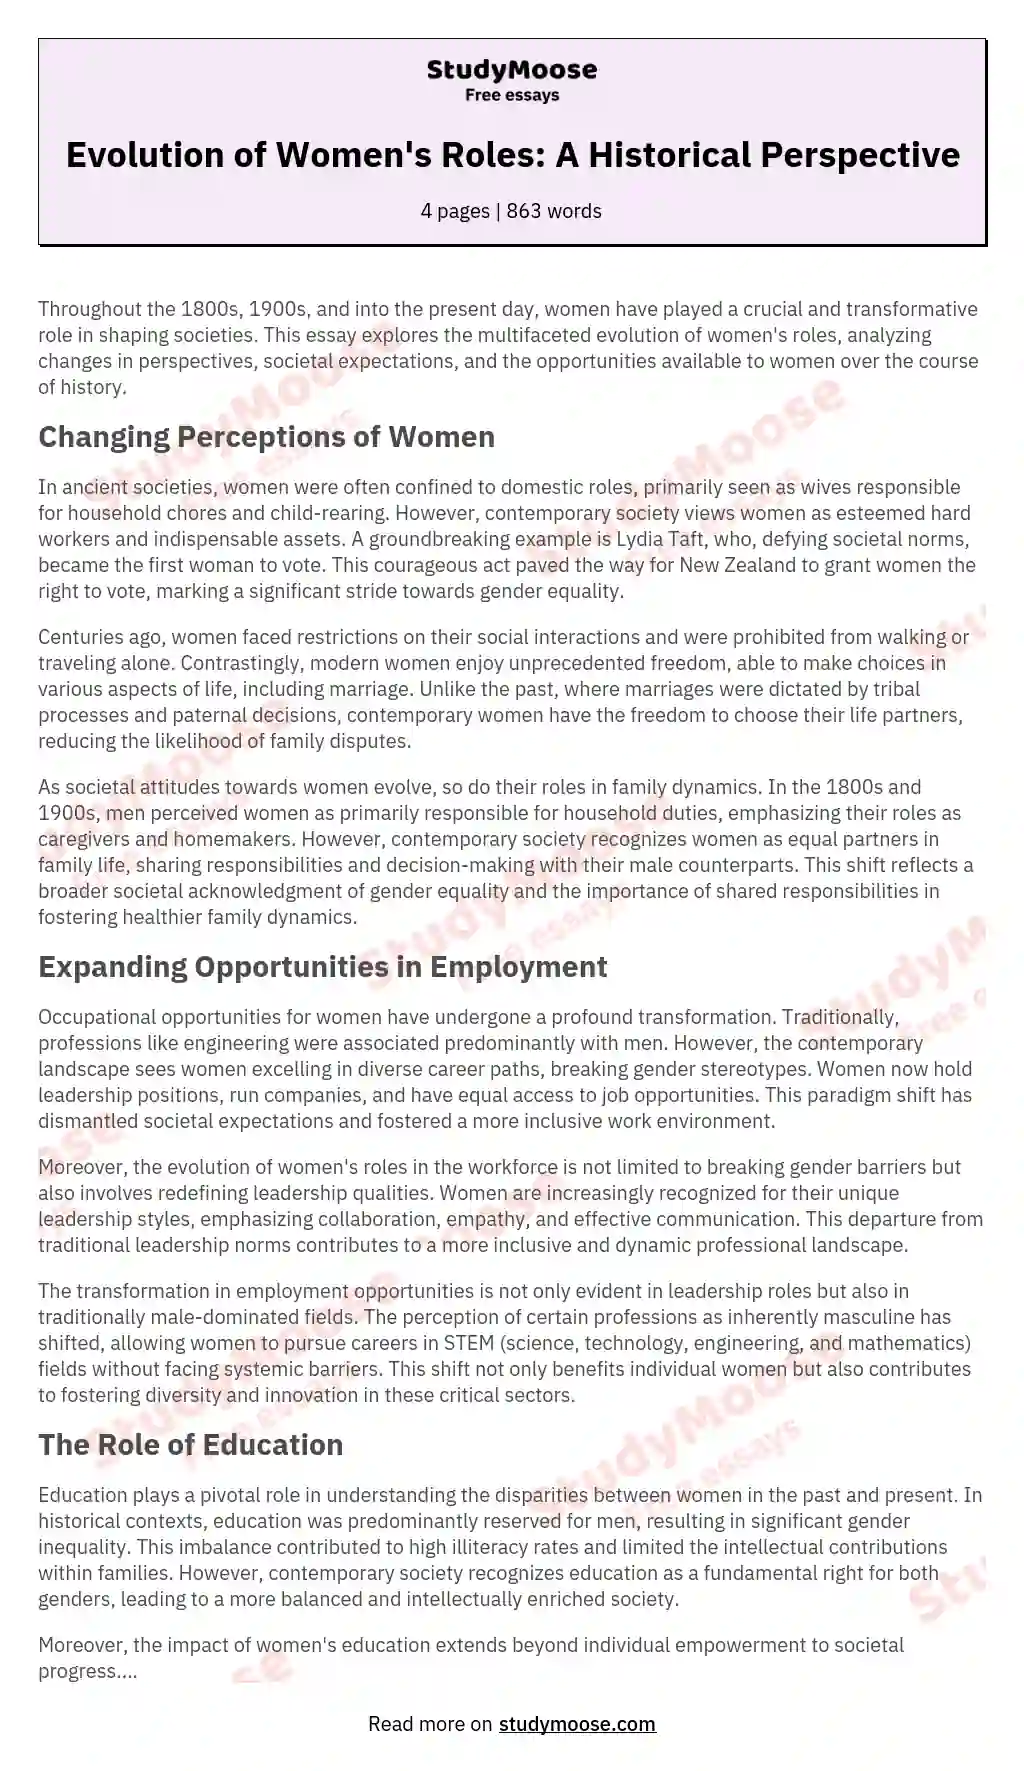 Evolution of Women's Roles: A Historical Perspective essay